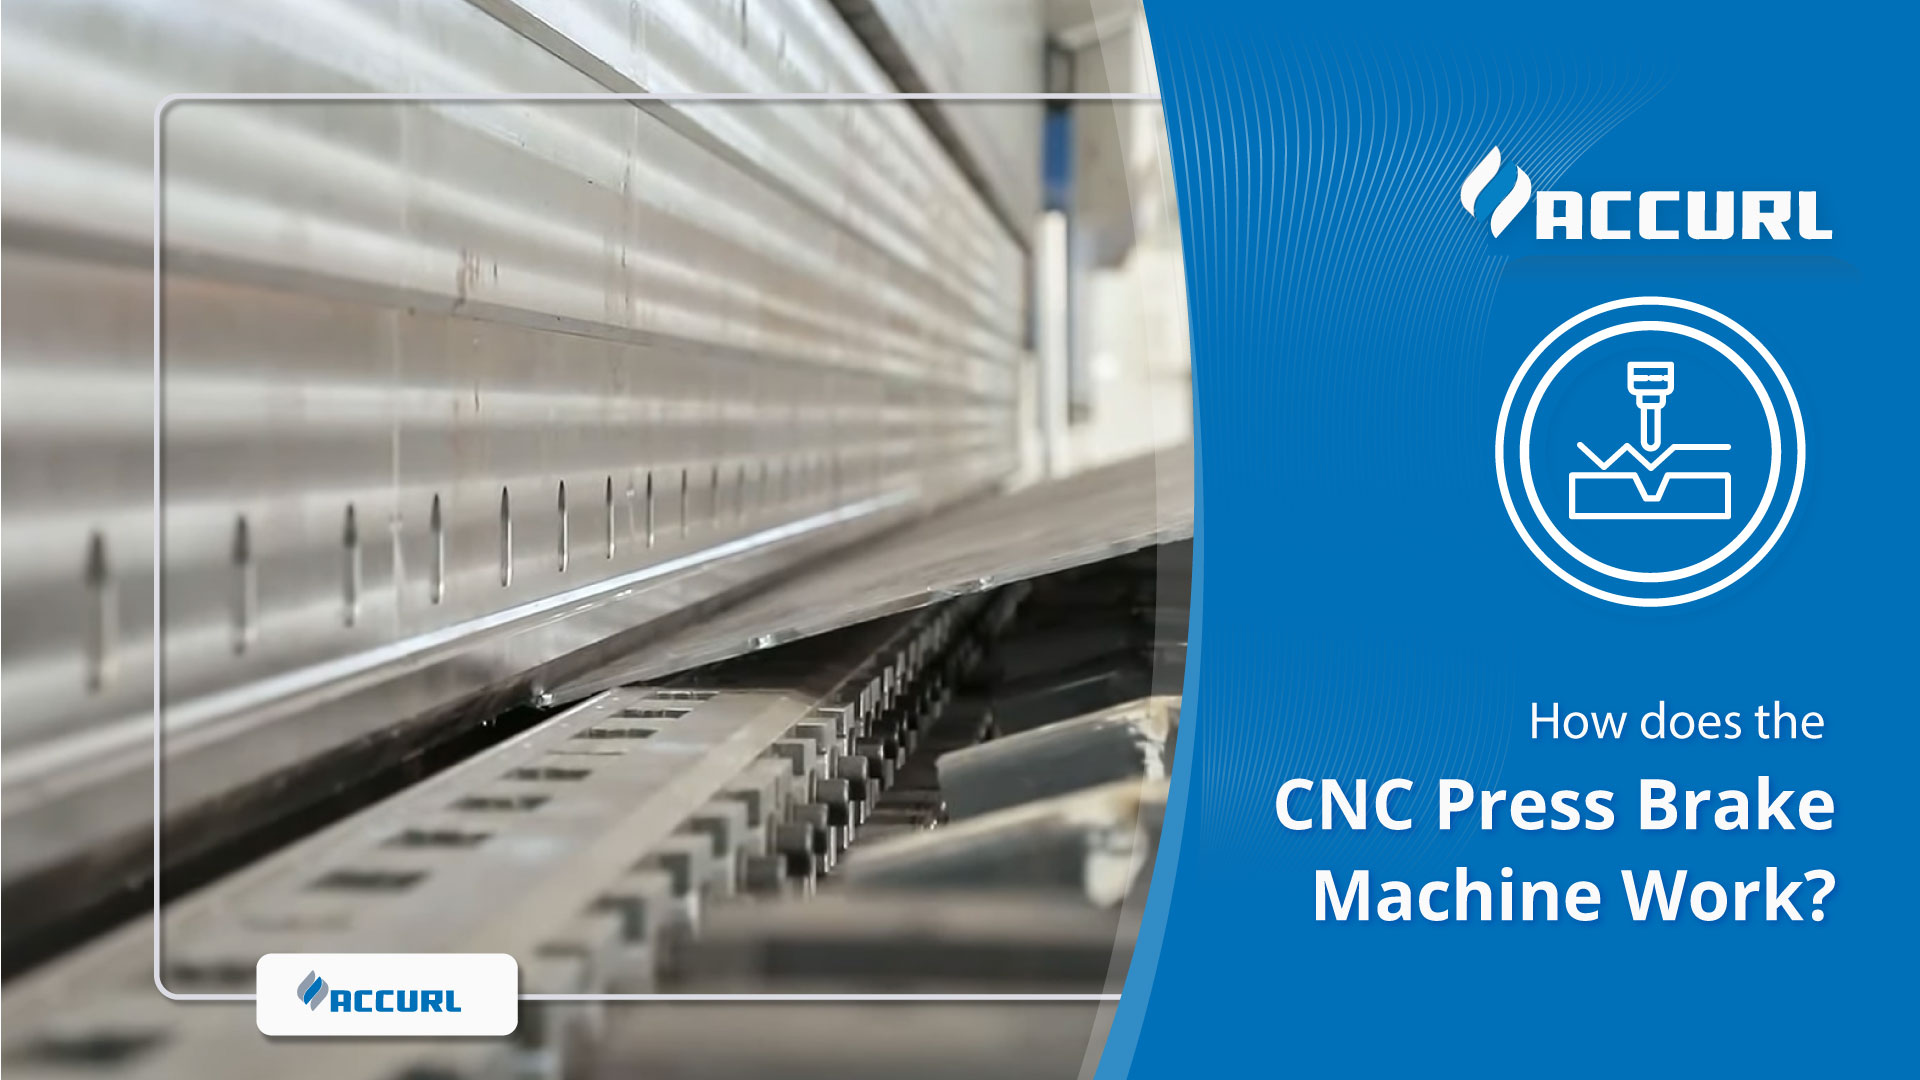 What is a CNC press brake machine and how does it work?